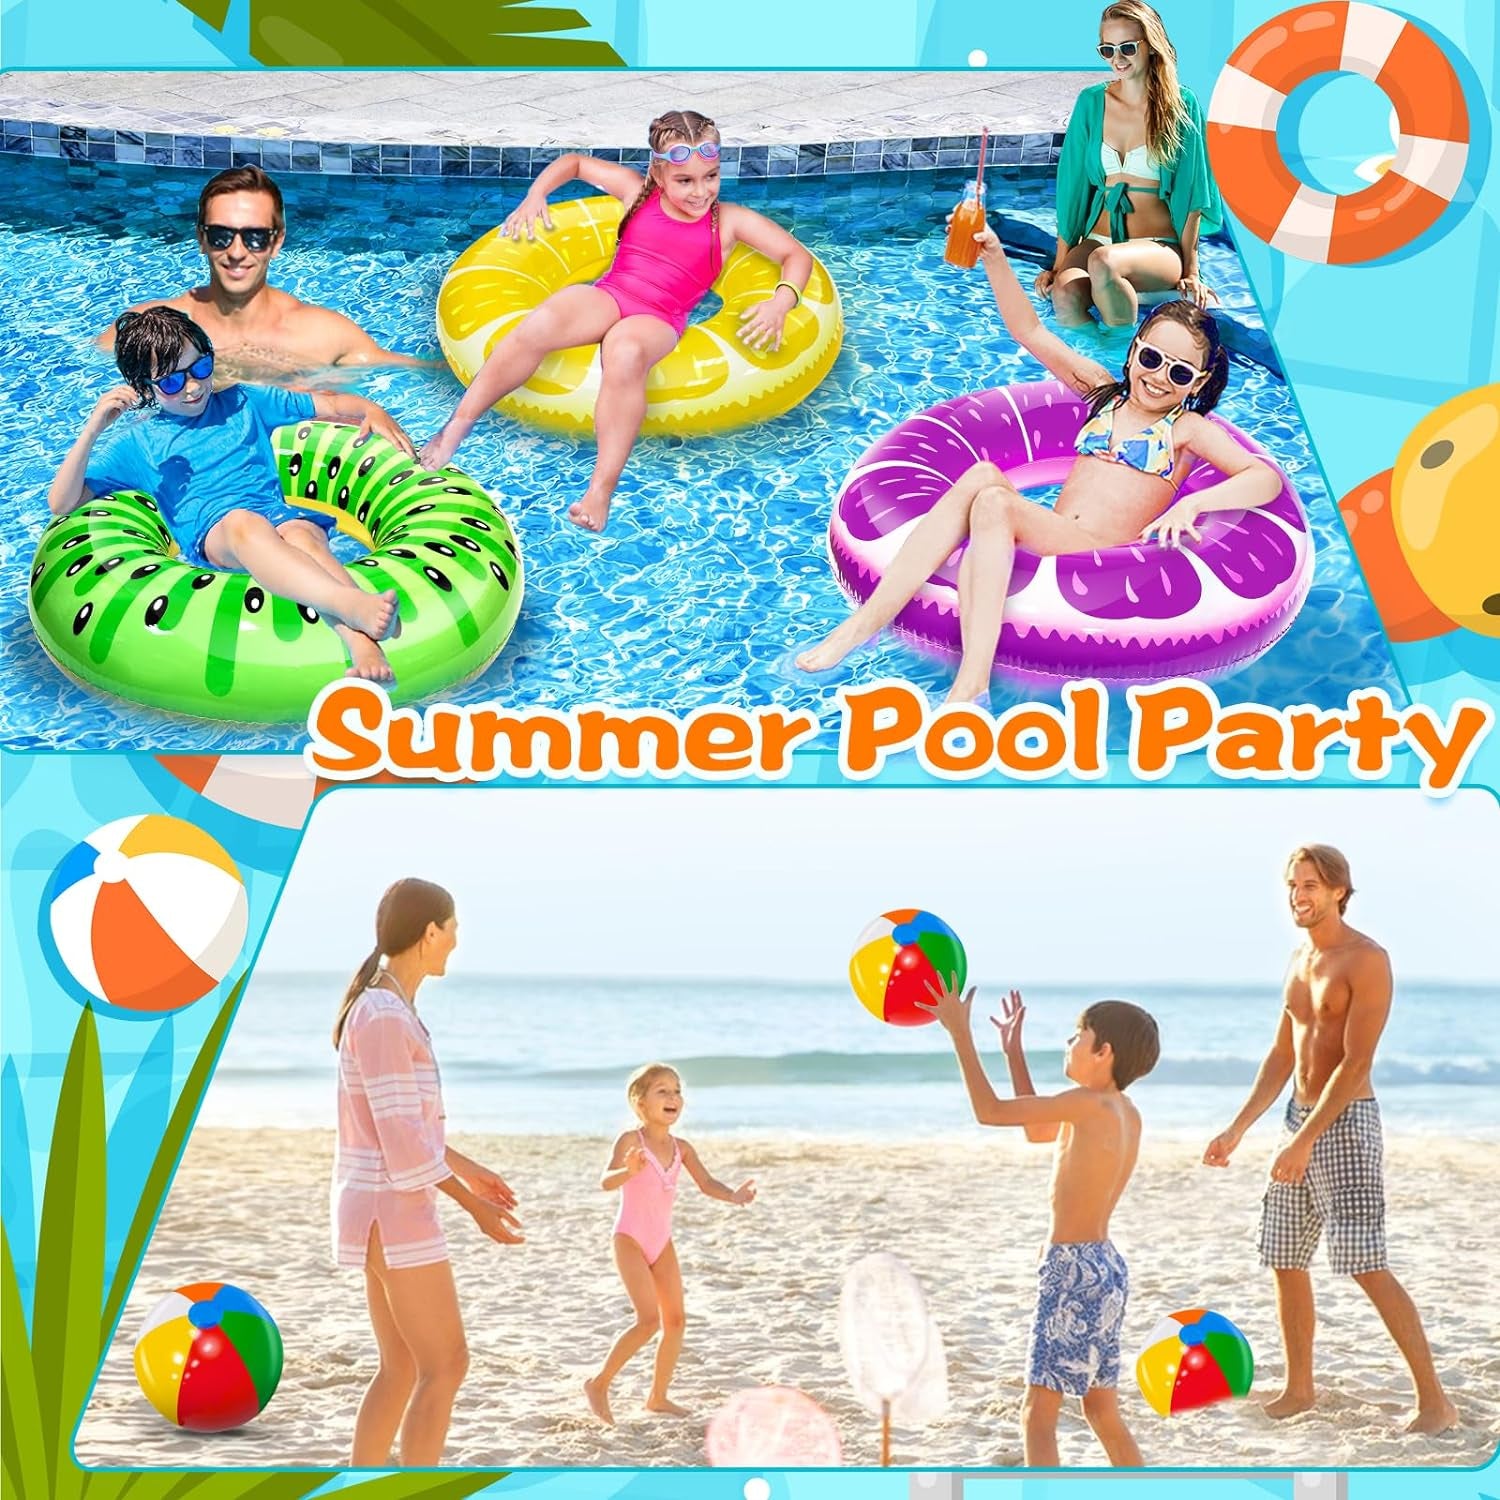 6 Pack Pool Floats Kids, 3 Pcs Inflatable Pool Fruits Swim Tubes Rings & 3 Pcs Rainbow Beach Ball Bulk, Summer Pool Floaties for Kids Adults Swimming Pool Party Float Toy Hawaiian Beach Water Fun Game